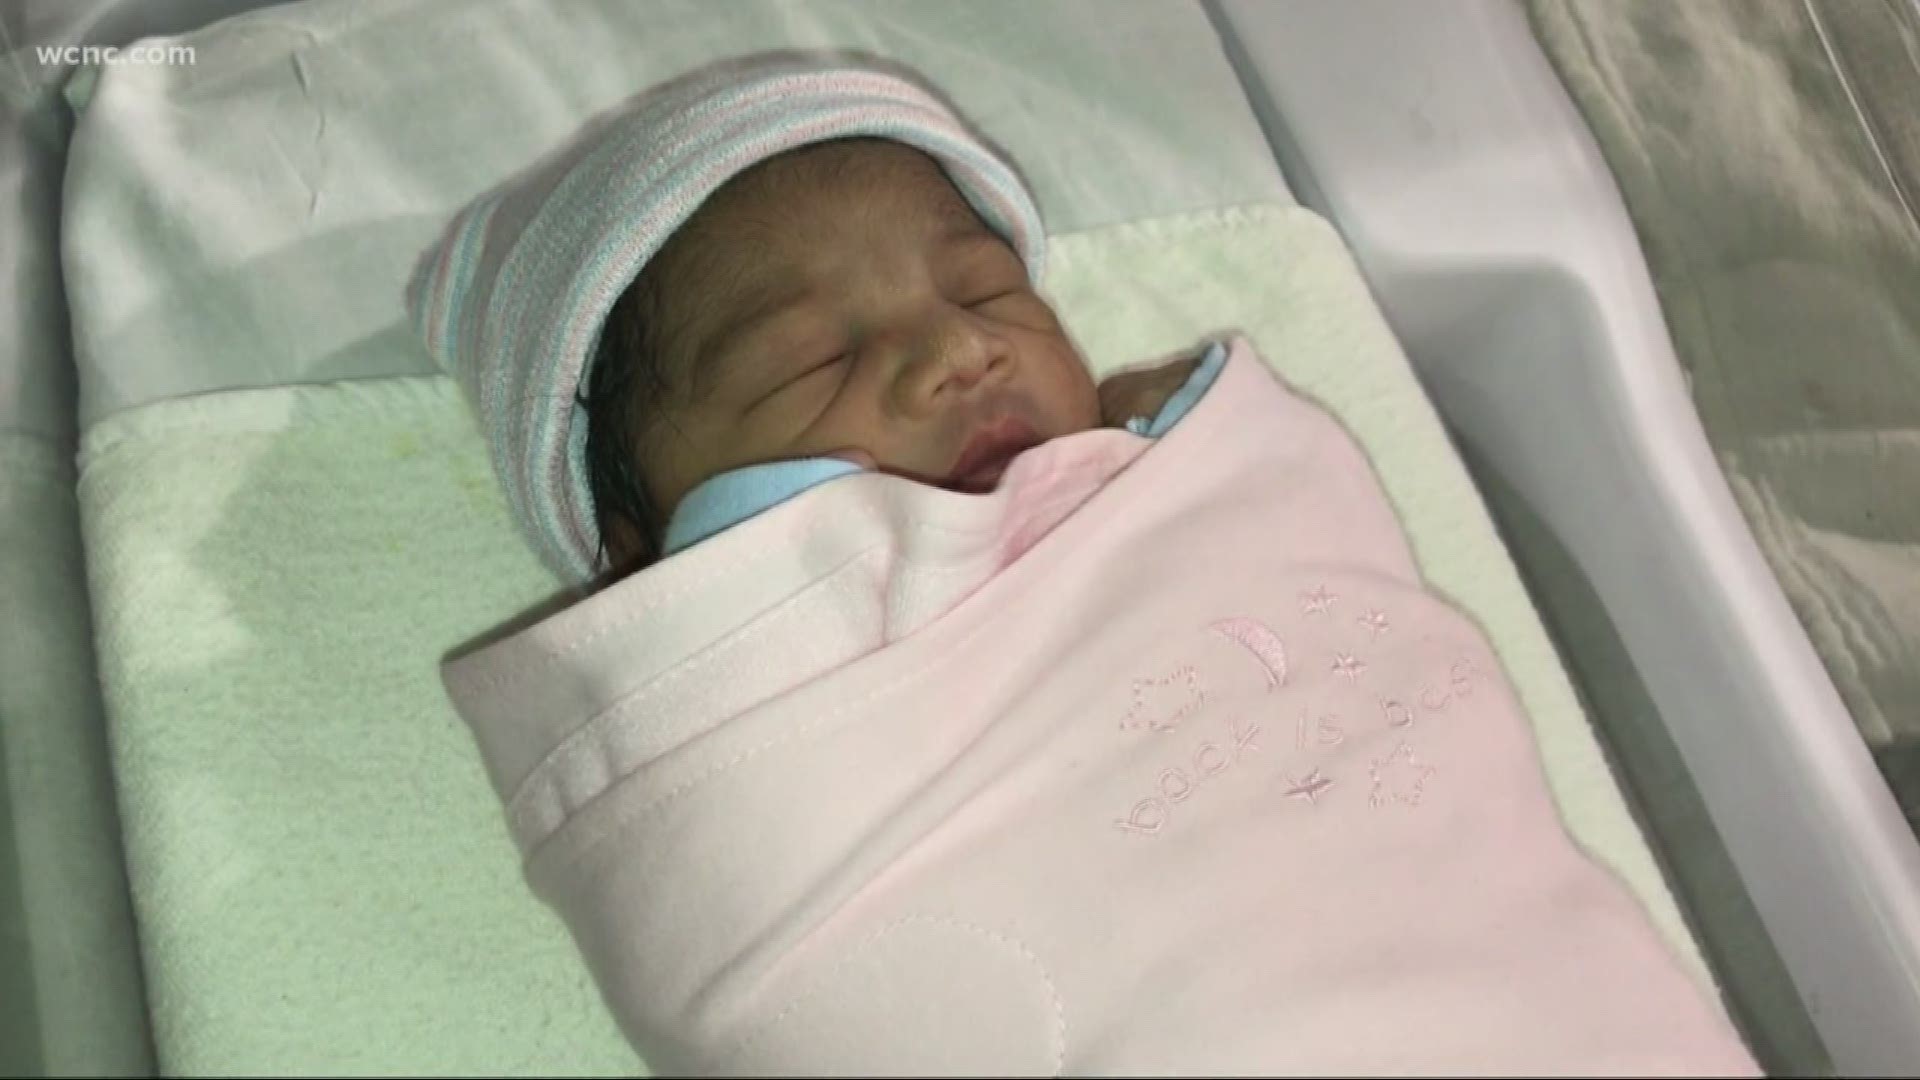 It was an extra special delivery at Charlotte's airport, just in time for the Thanksgiving holiday. The new mom said she named her baby daughter Lizyana Sky Taylor.